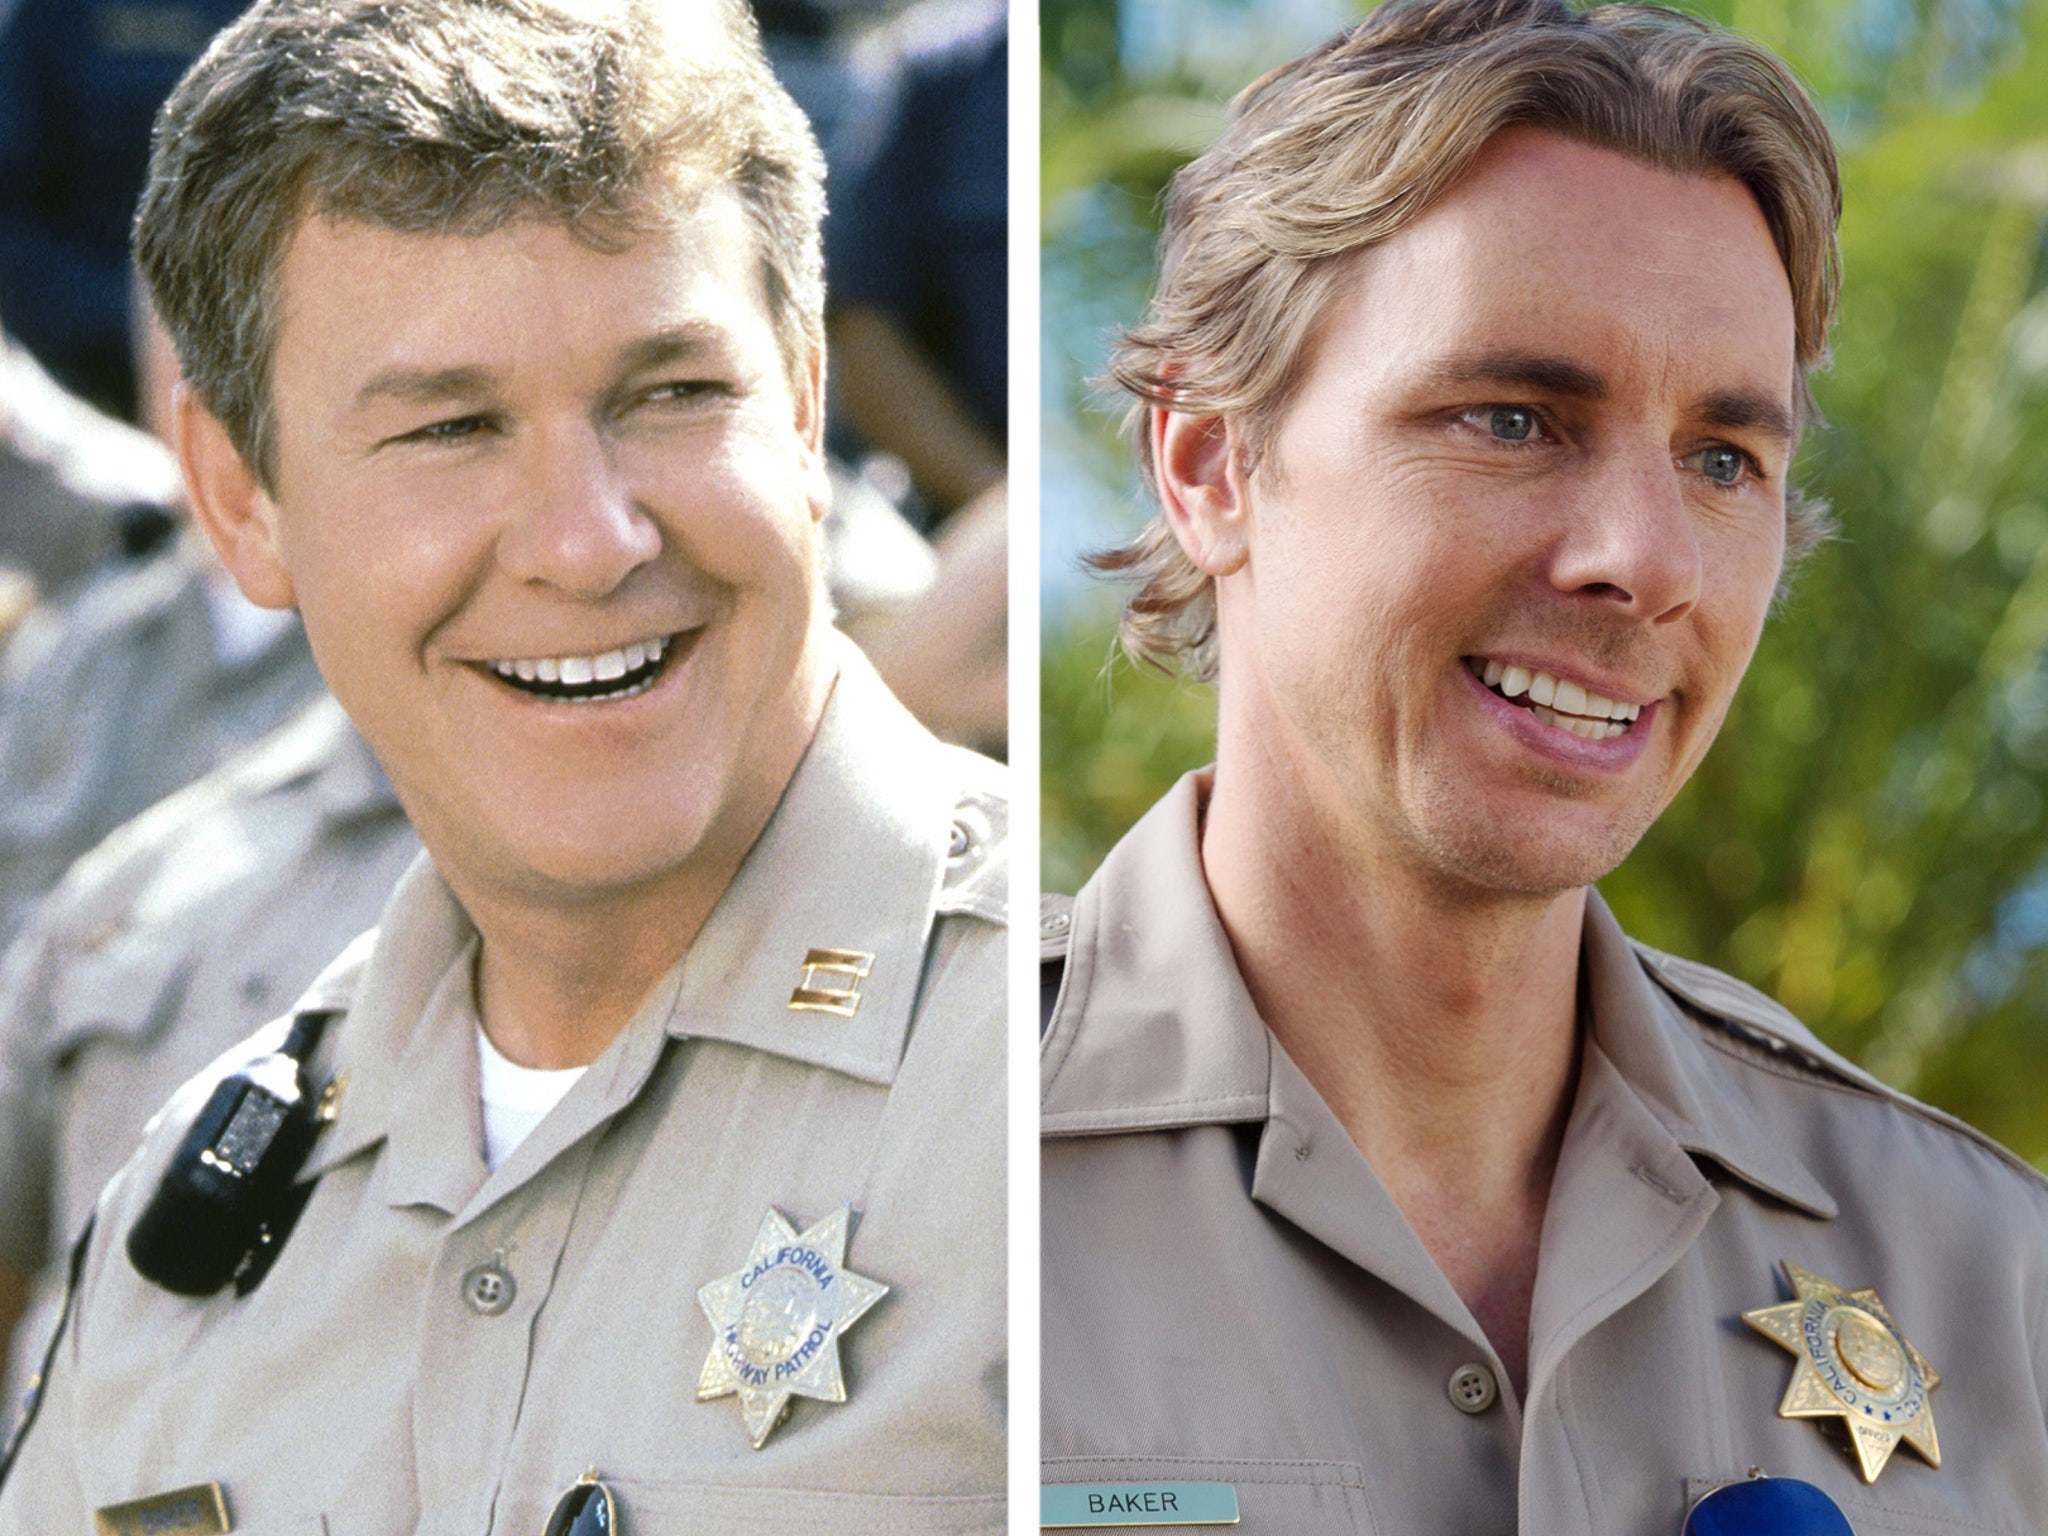 Chips Tv Show Porn - CHiPs' TV Star Will Skip Dax Shepard's 'Dumb,' 'Soft-Porn Version' in  Theaters